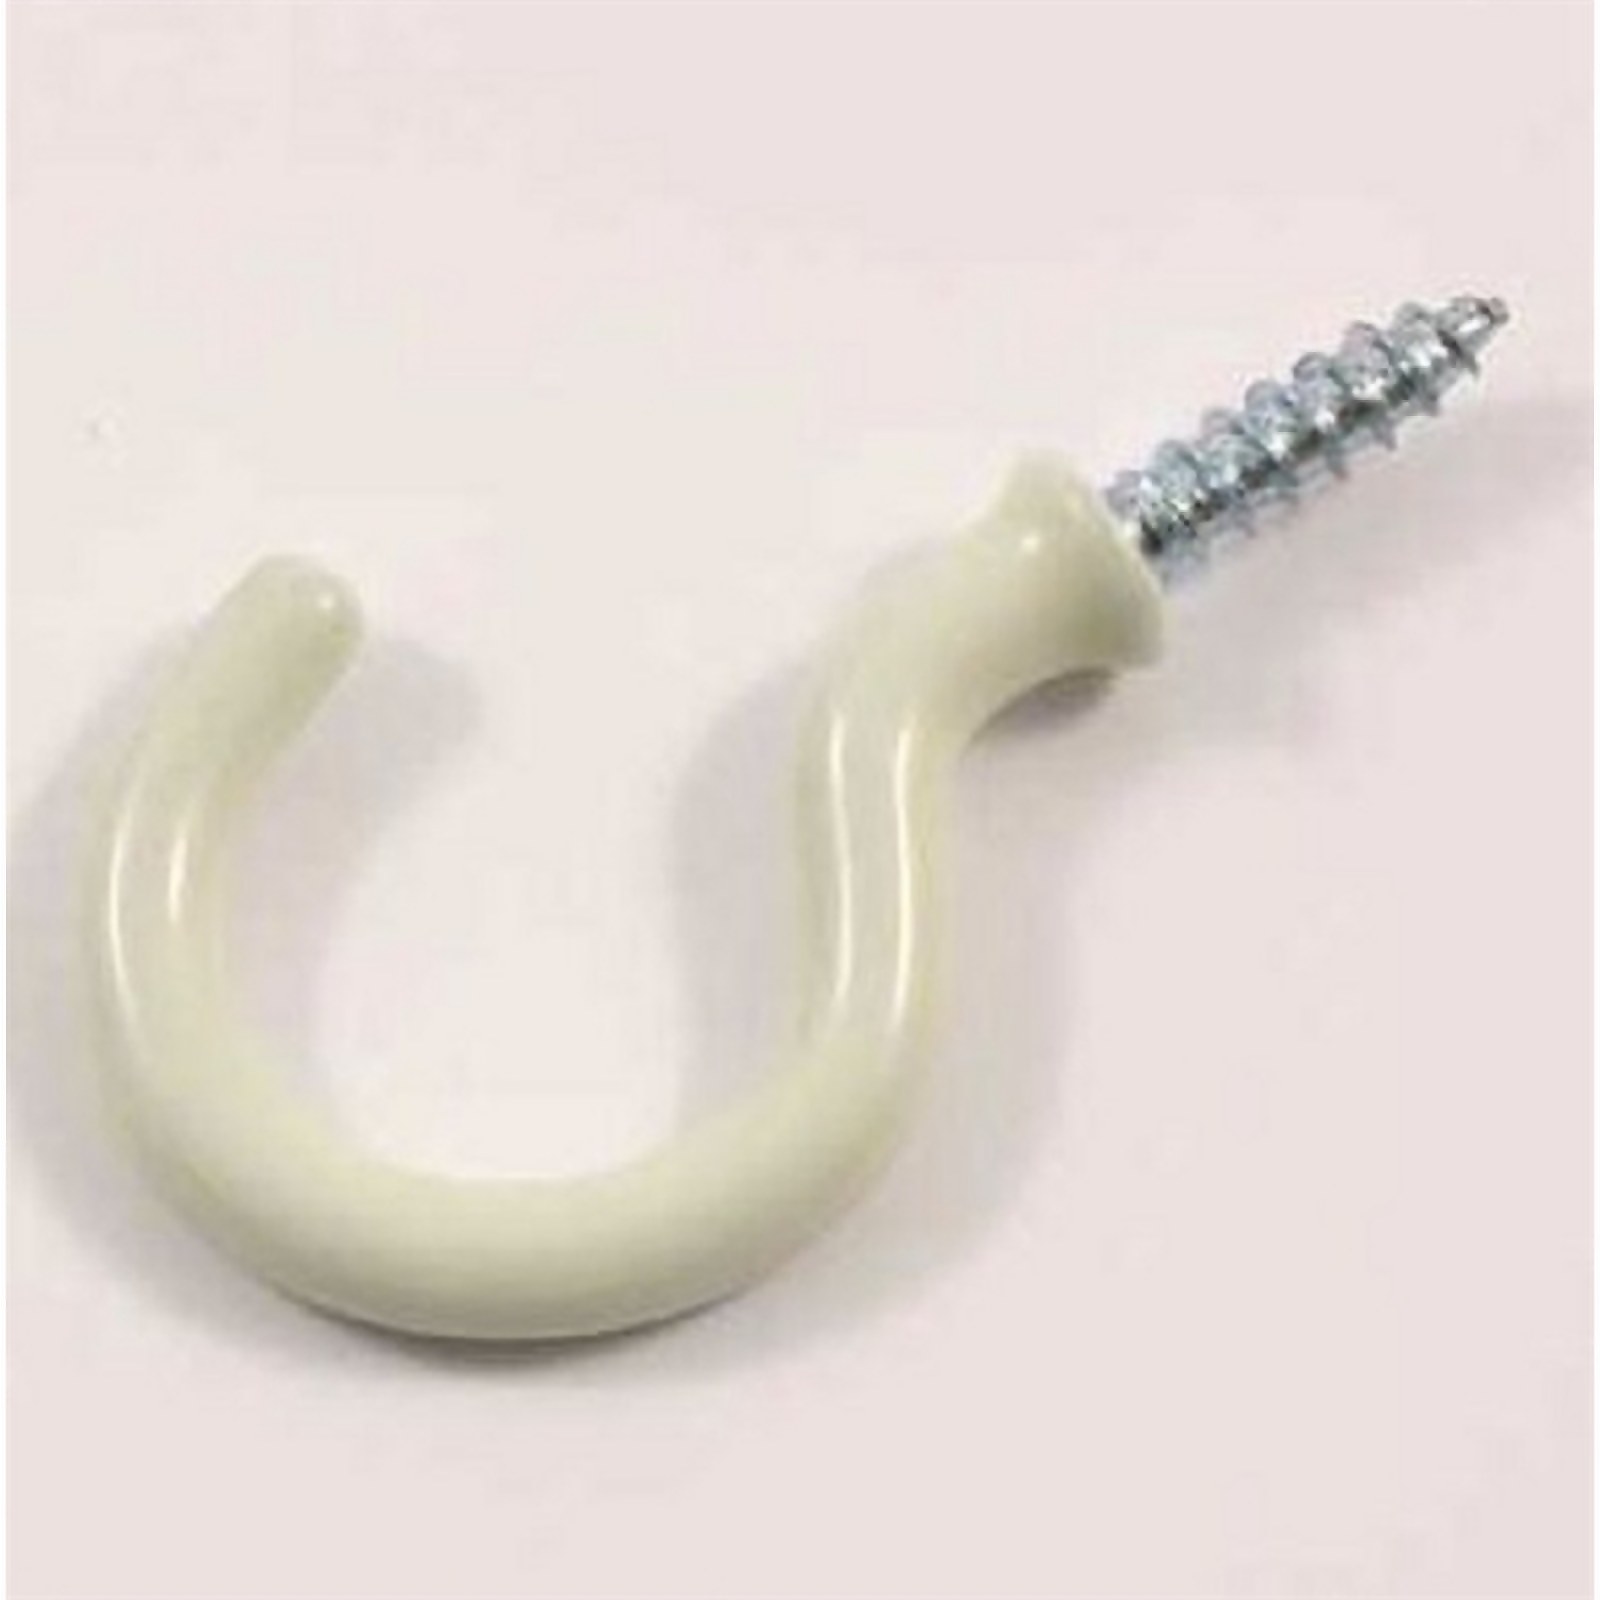 Photo of Round Cup Hook - White - 31mm - 4 Pack